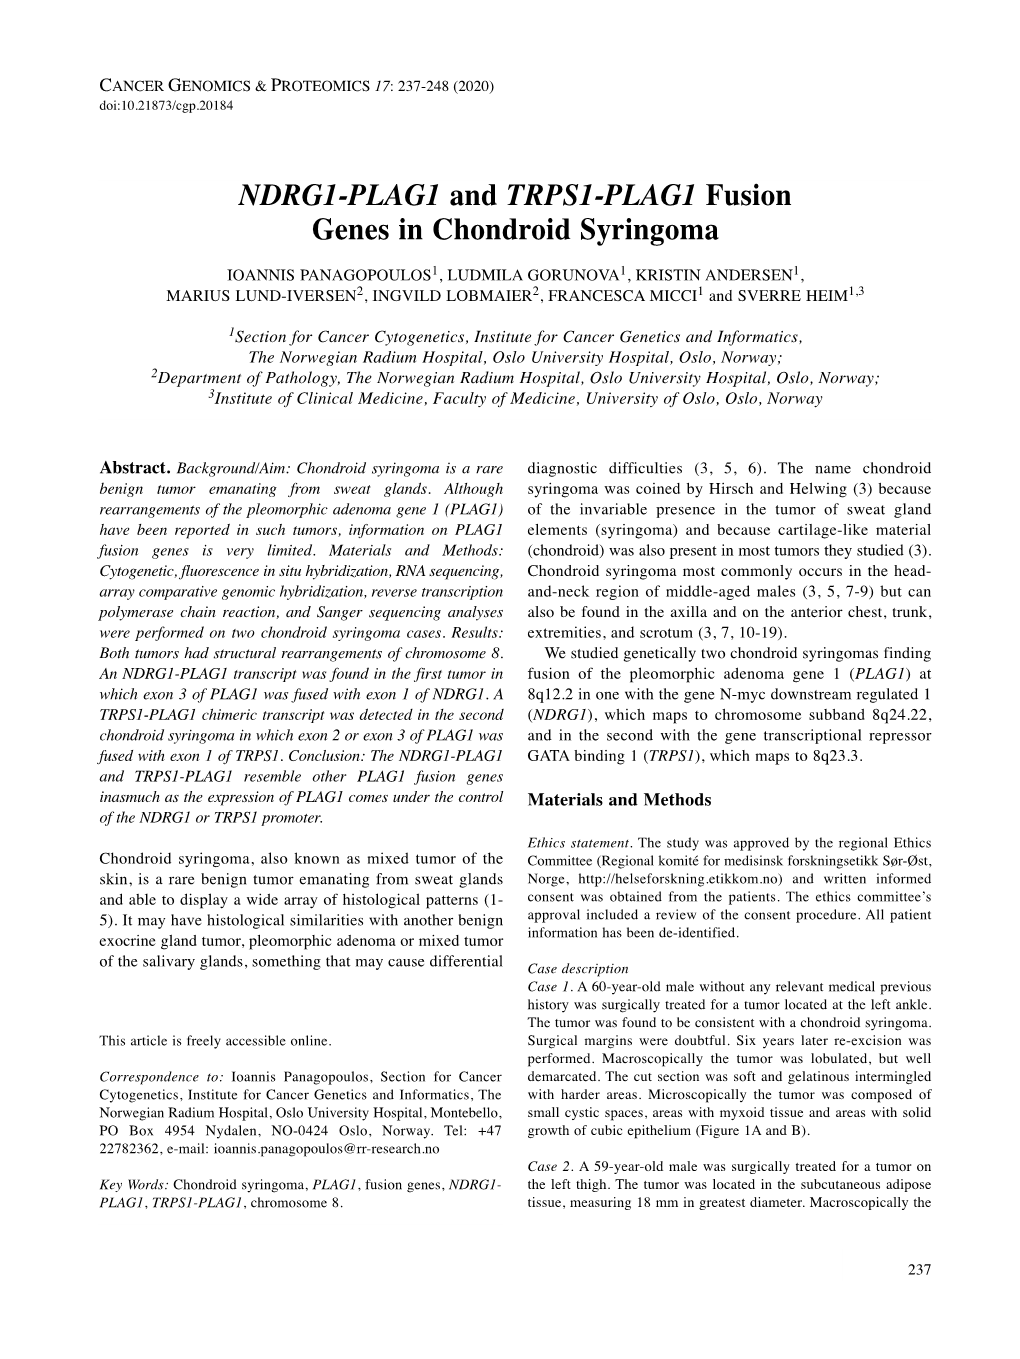 NDRG1-PLAG1 and TRPS1-PLAG1 Fusion Genes in Chondroid